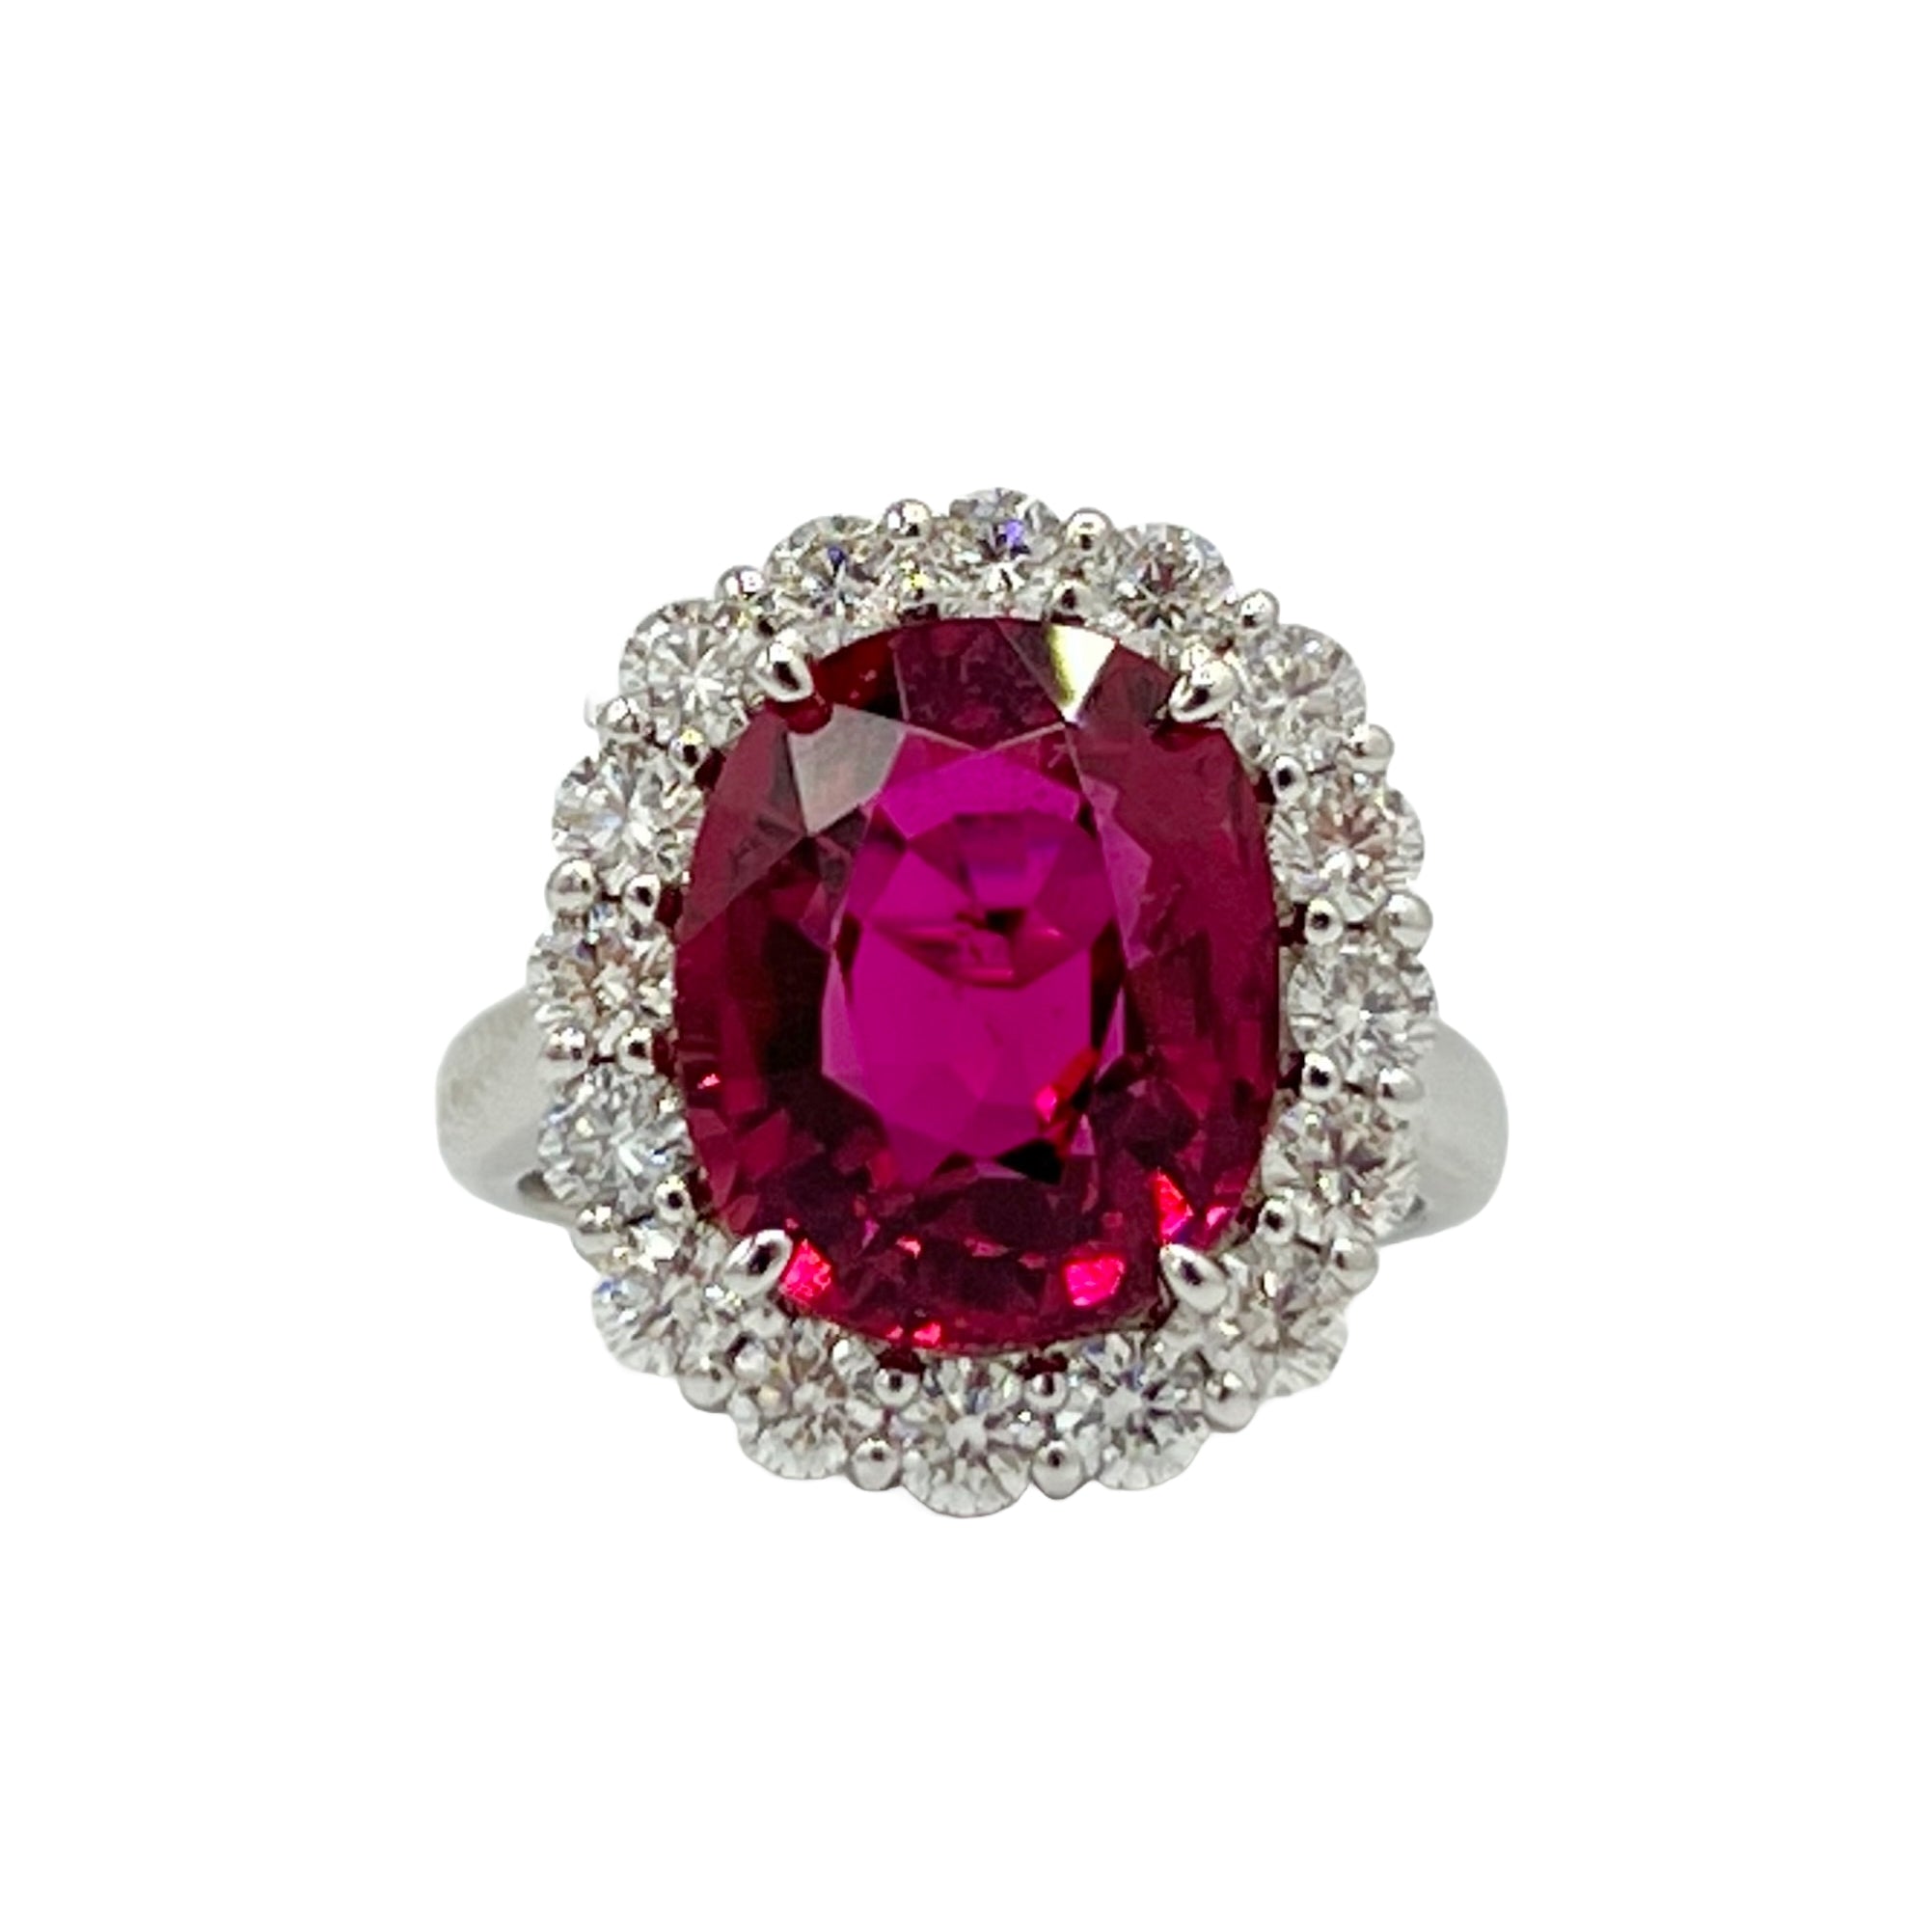 Ring 18KW/6.8G 1RUBL-6.64CT 16RD-1.26CT